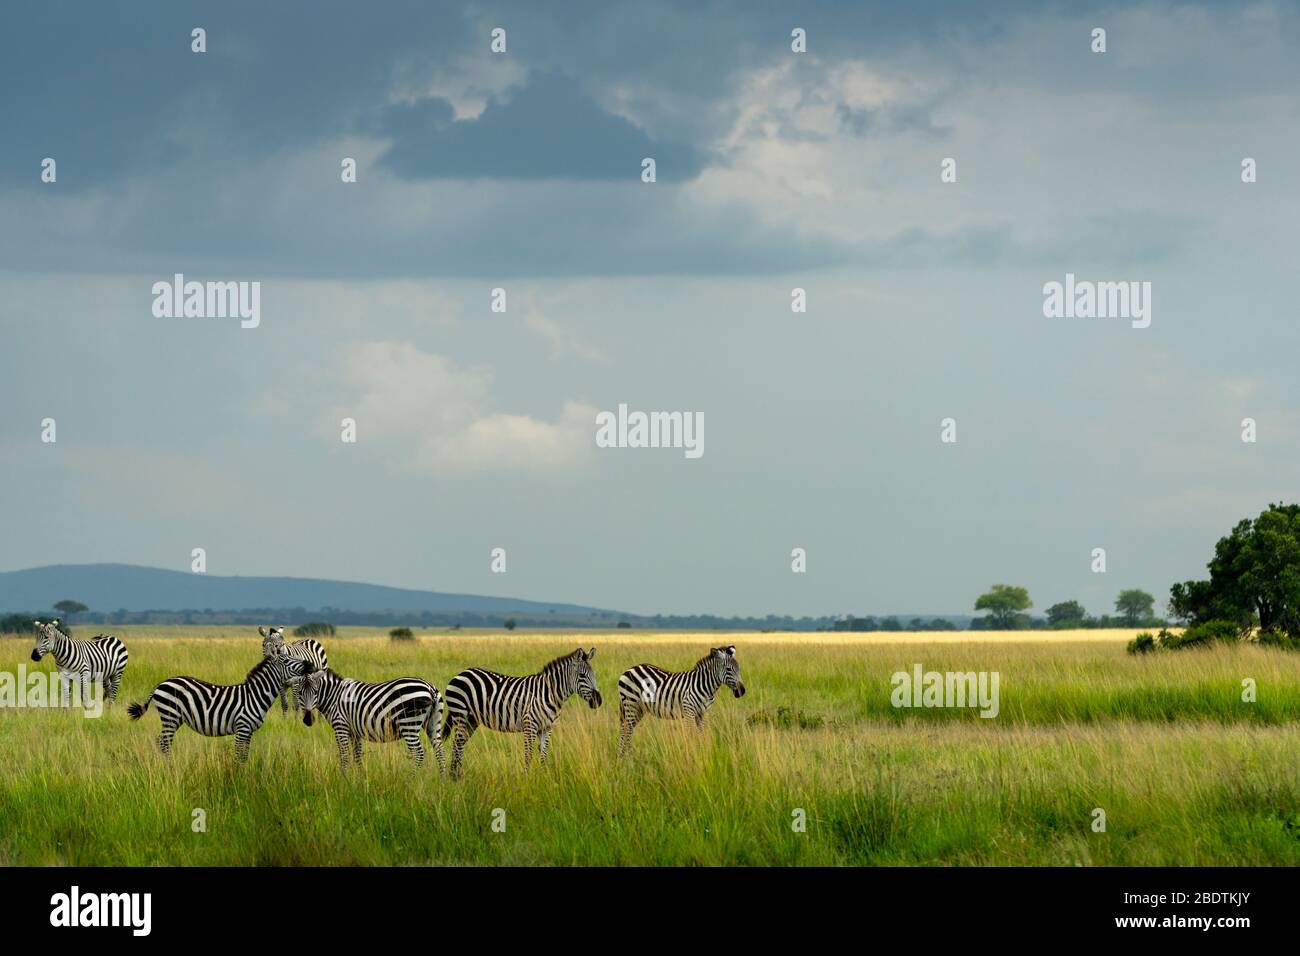 several zebras walk in the plains of africa under a stormy sky Stock Photo